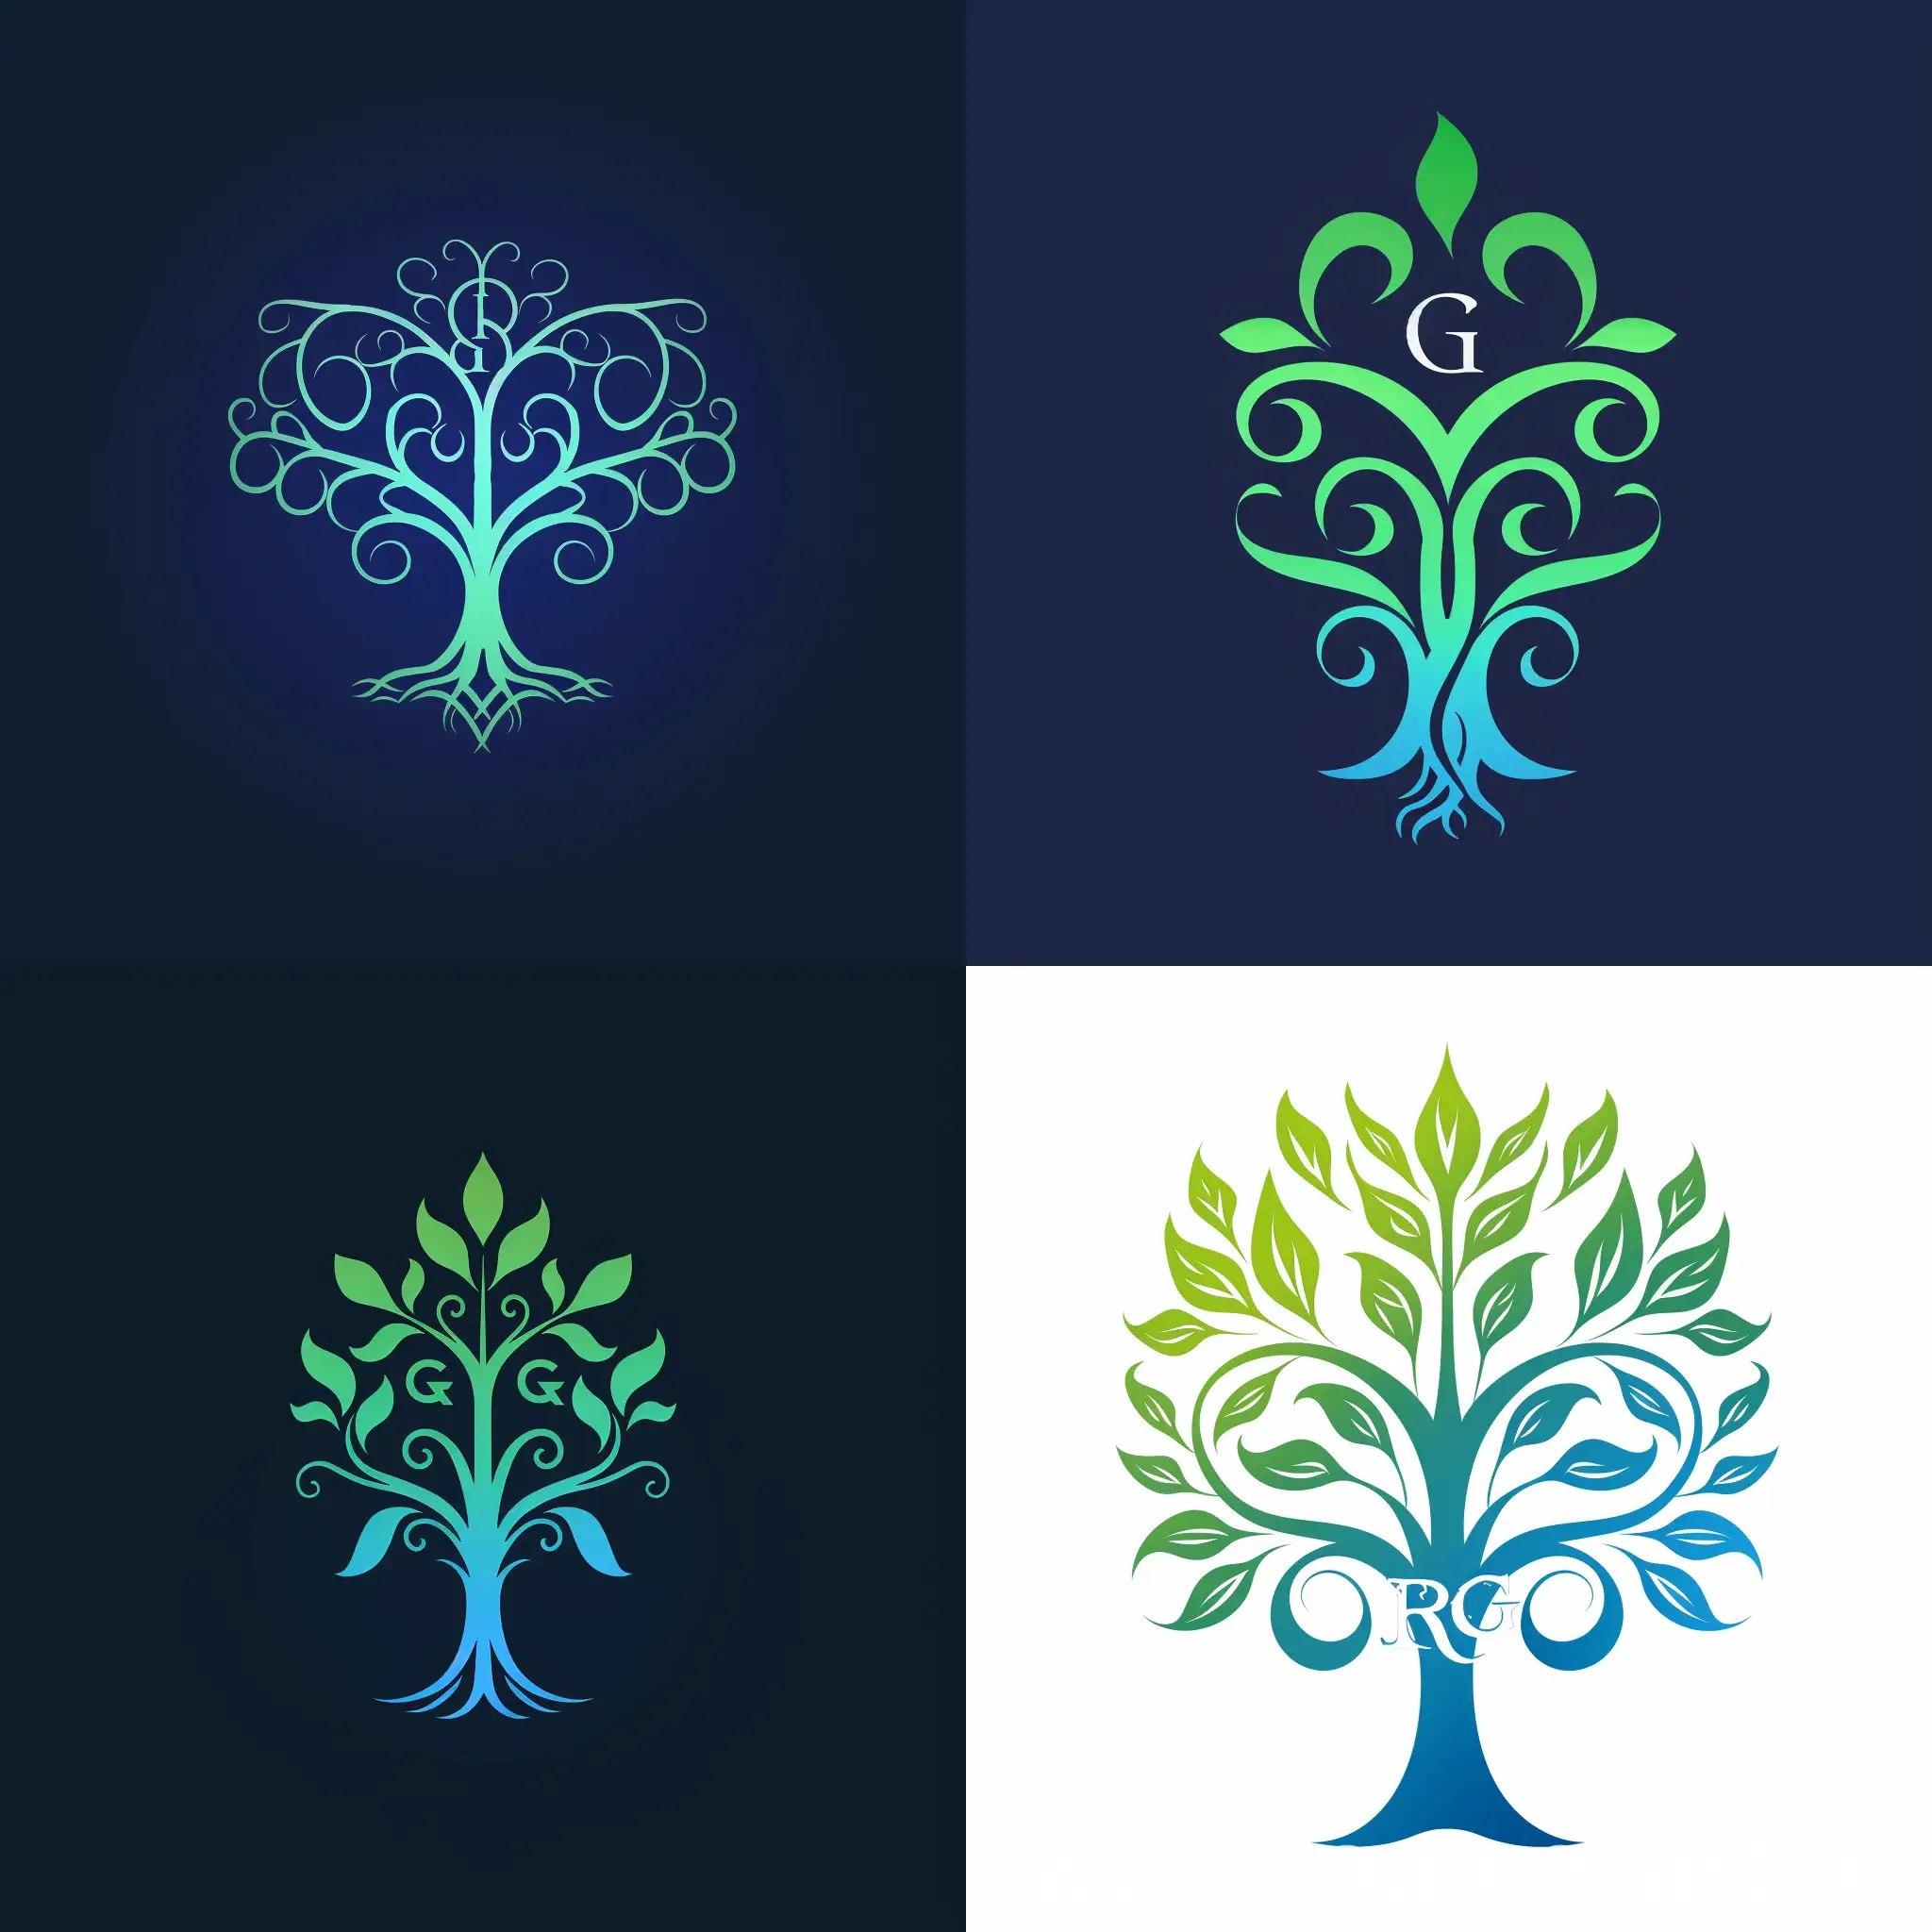 A symbol that combines Rafael Goffi's initials "RG" in a stylized way, forming a tree. The tree symbolizes growth, strength and connection with nature, while the initials represent Rafael's personal identity. The choice of colors can be green, which refers to nature and hope, and blue, which conveys confidence and stability.